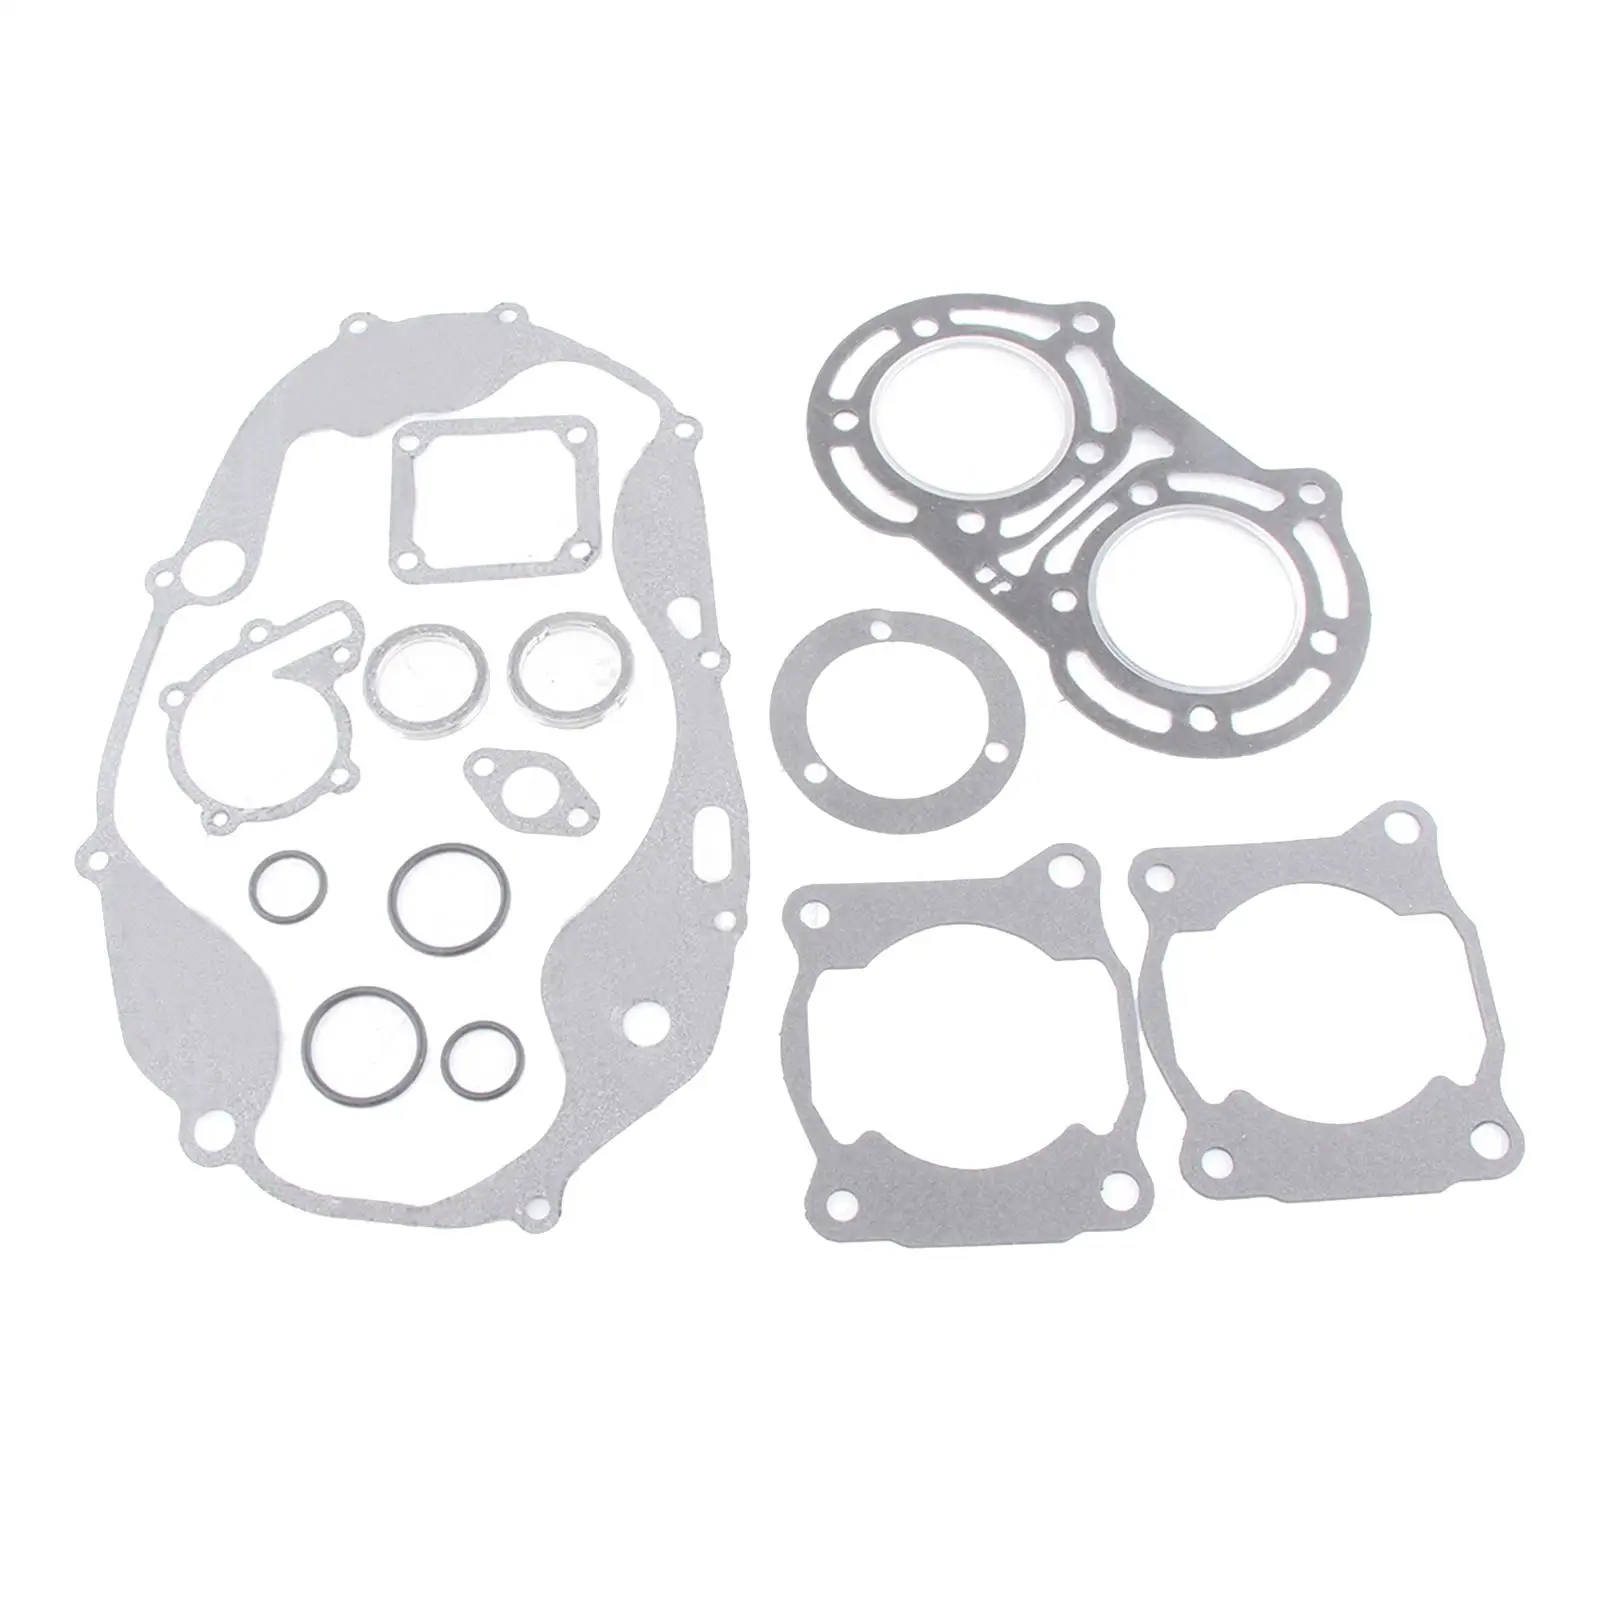 New Replacement   Engine Gasket, Full Set, for ATV YFZ350, Banshee 350 87-06 GS34